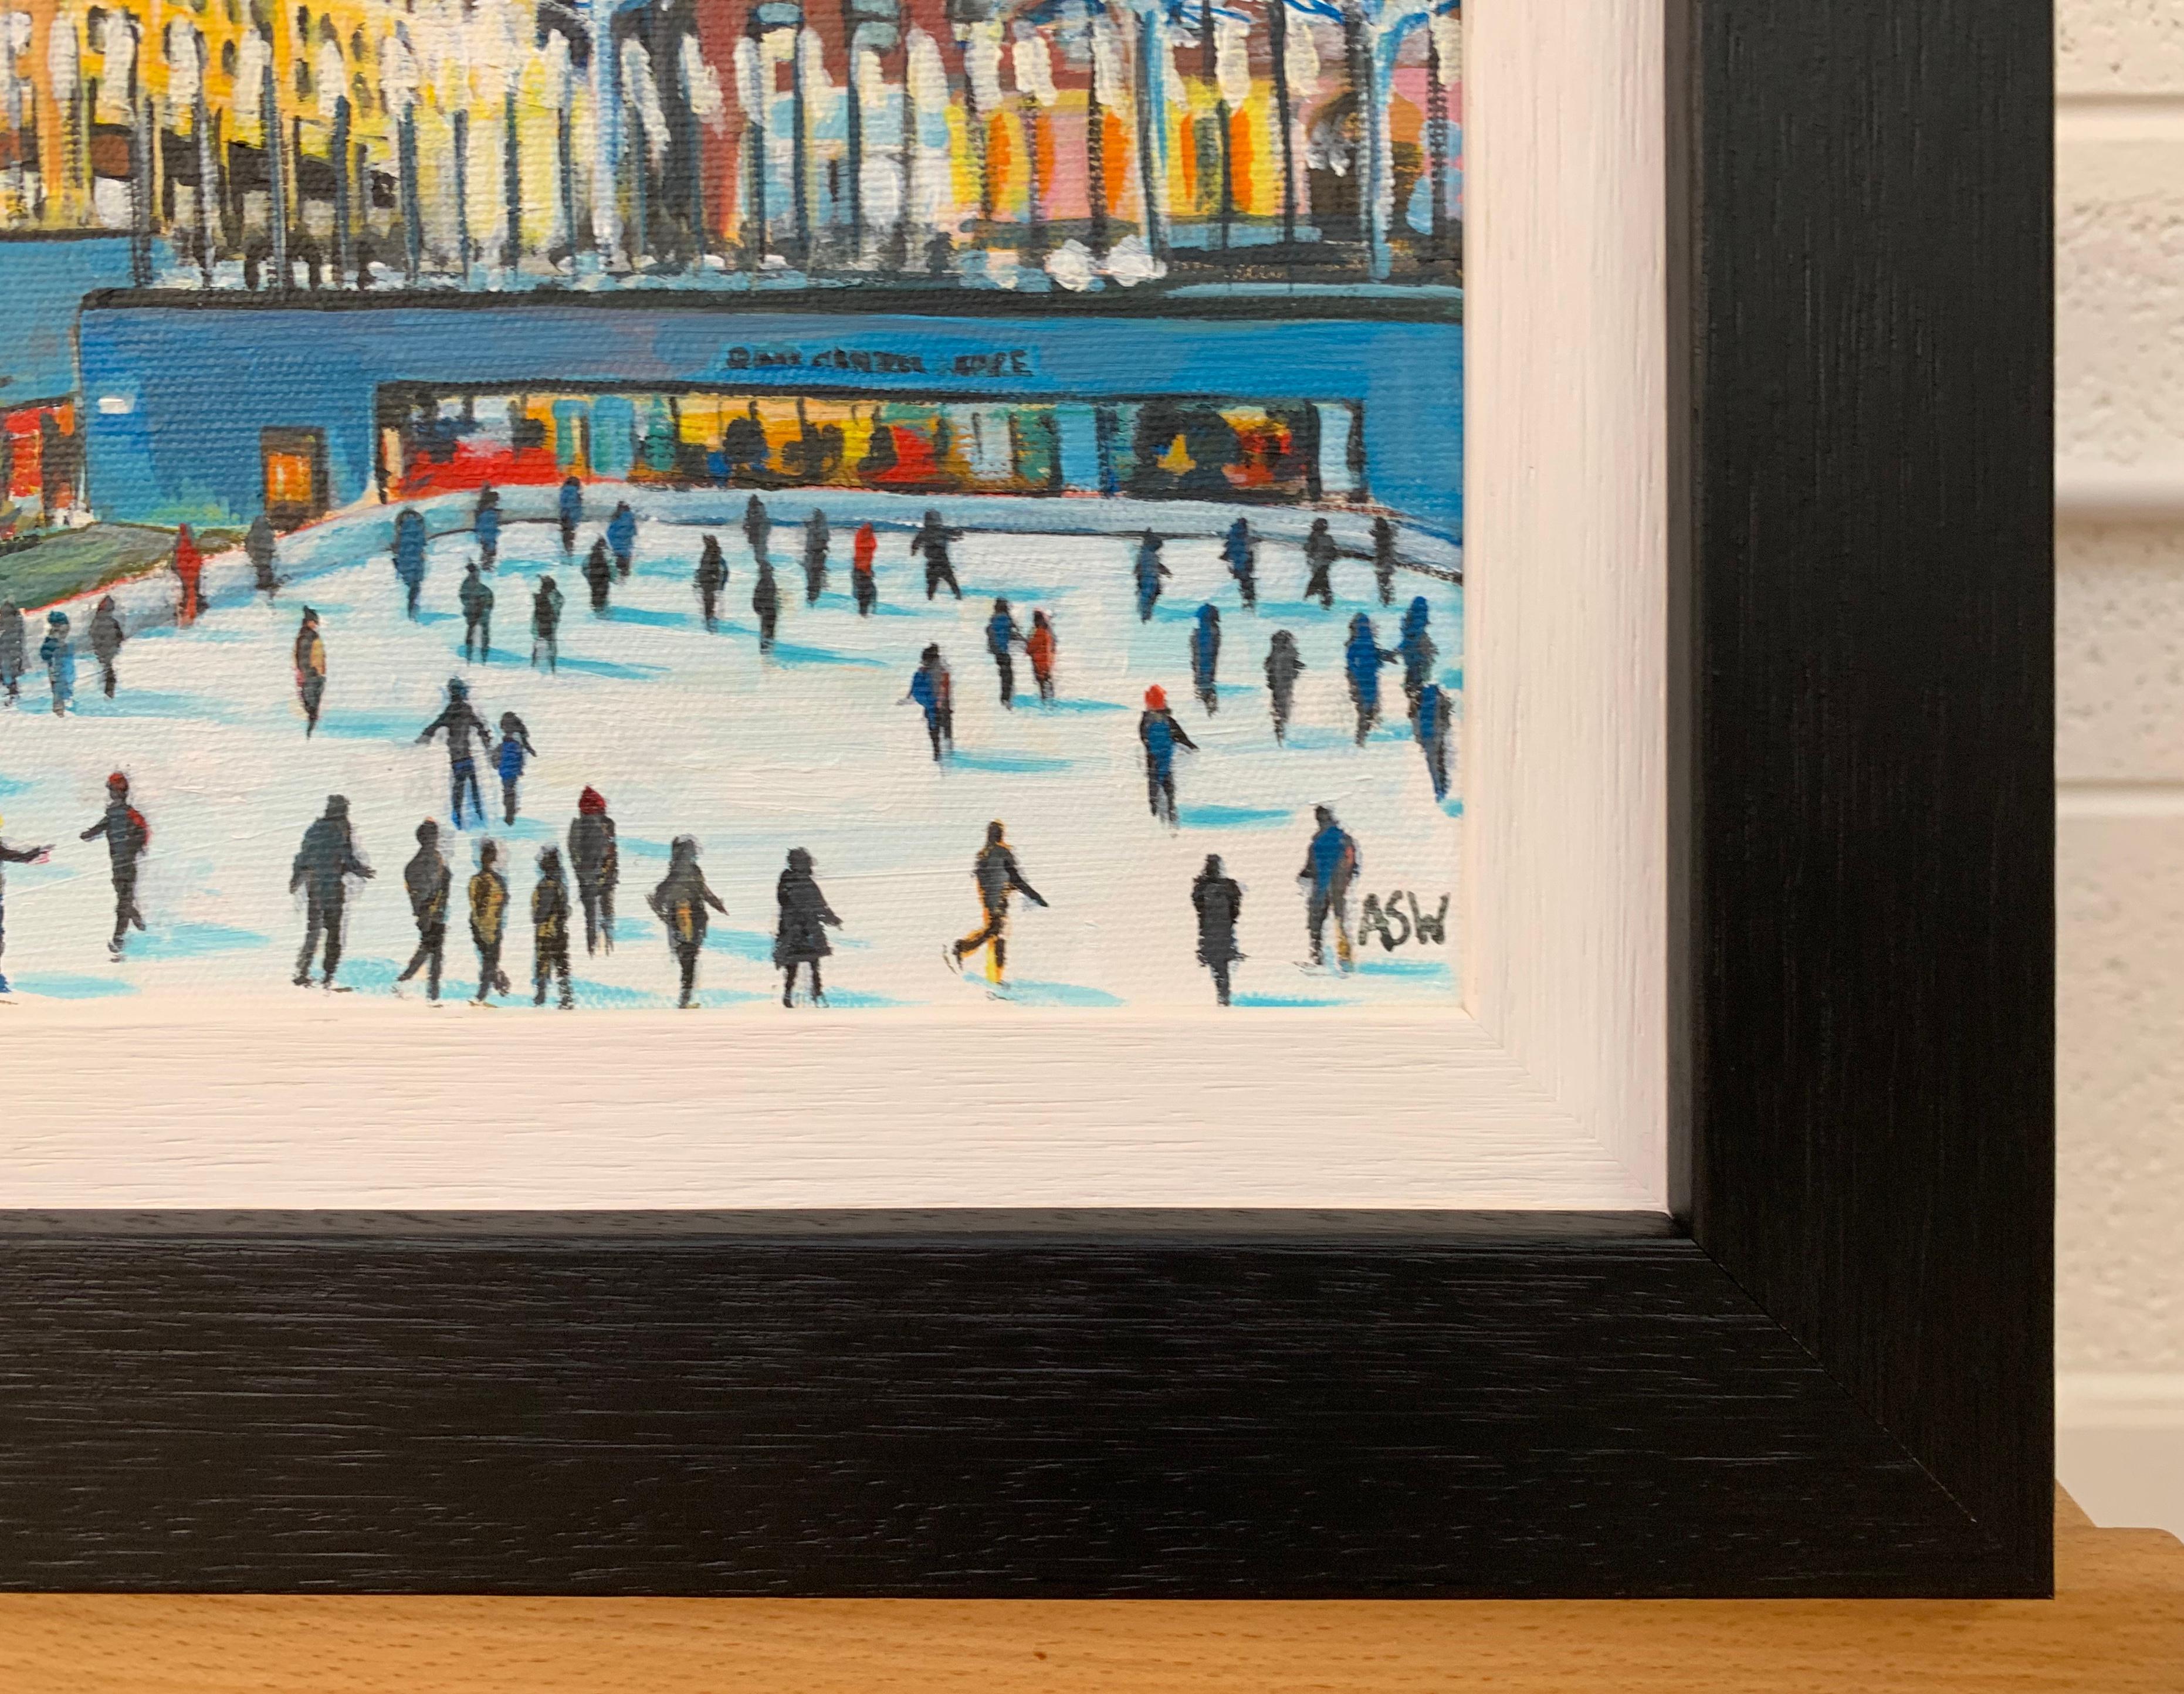 Original Painting of Christmas Ice Skaters at the Rockefeller Center Rink, New York City, by leading British Cityscape Artist, Angela Wakefield.

Art measures 12 x 10 inches
Frame measures 16 x 14 inches

Angela Wakefield has twice been on the front